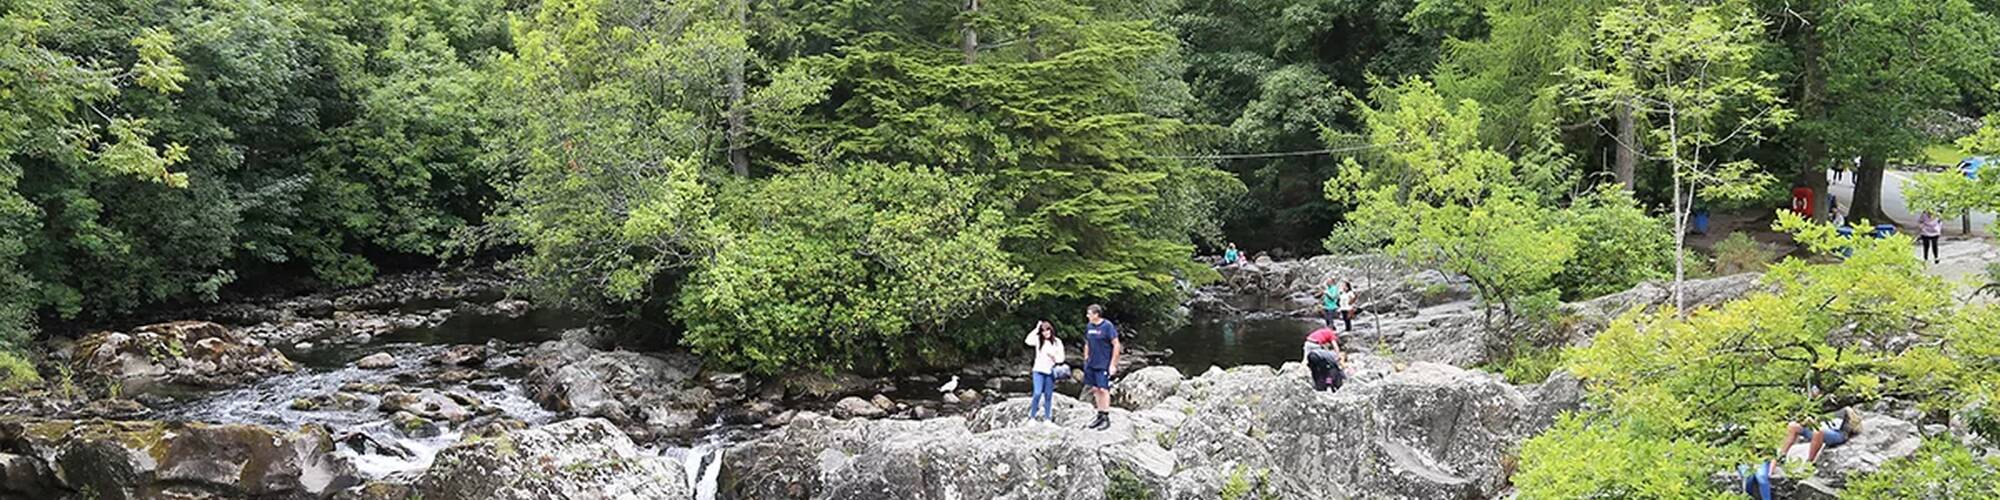 11 Things to Do Around Betws y Coed